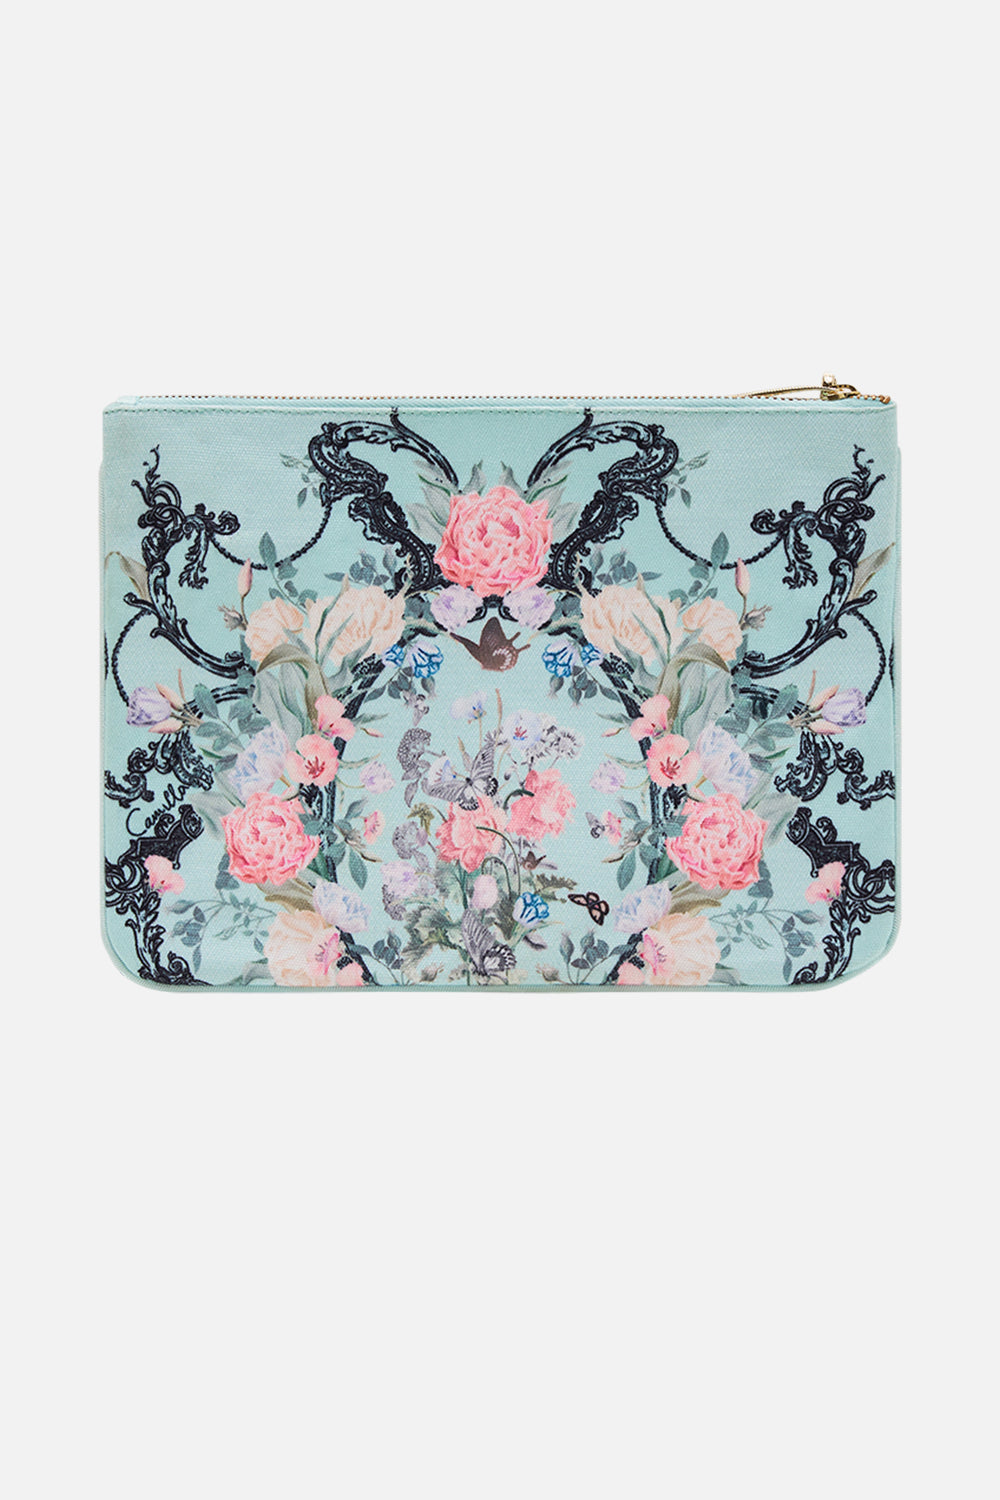 CAMILLA Floral Small Canvas Clutch in Petal Promise Land print